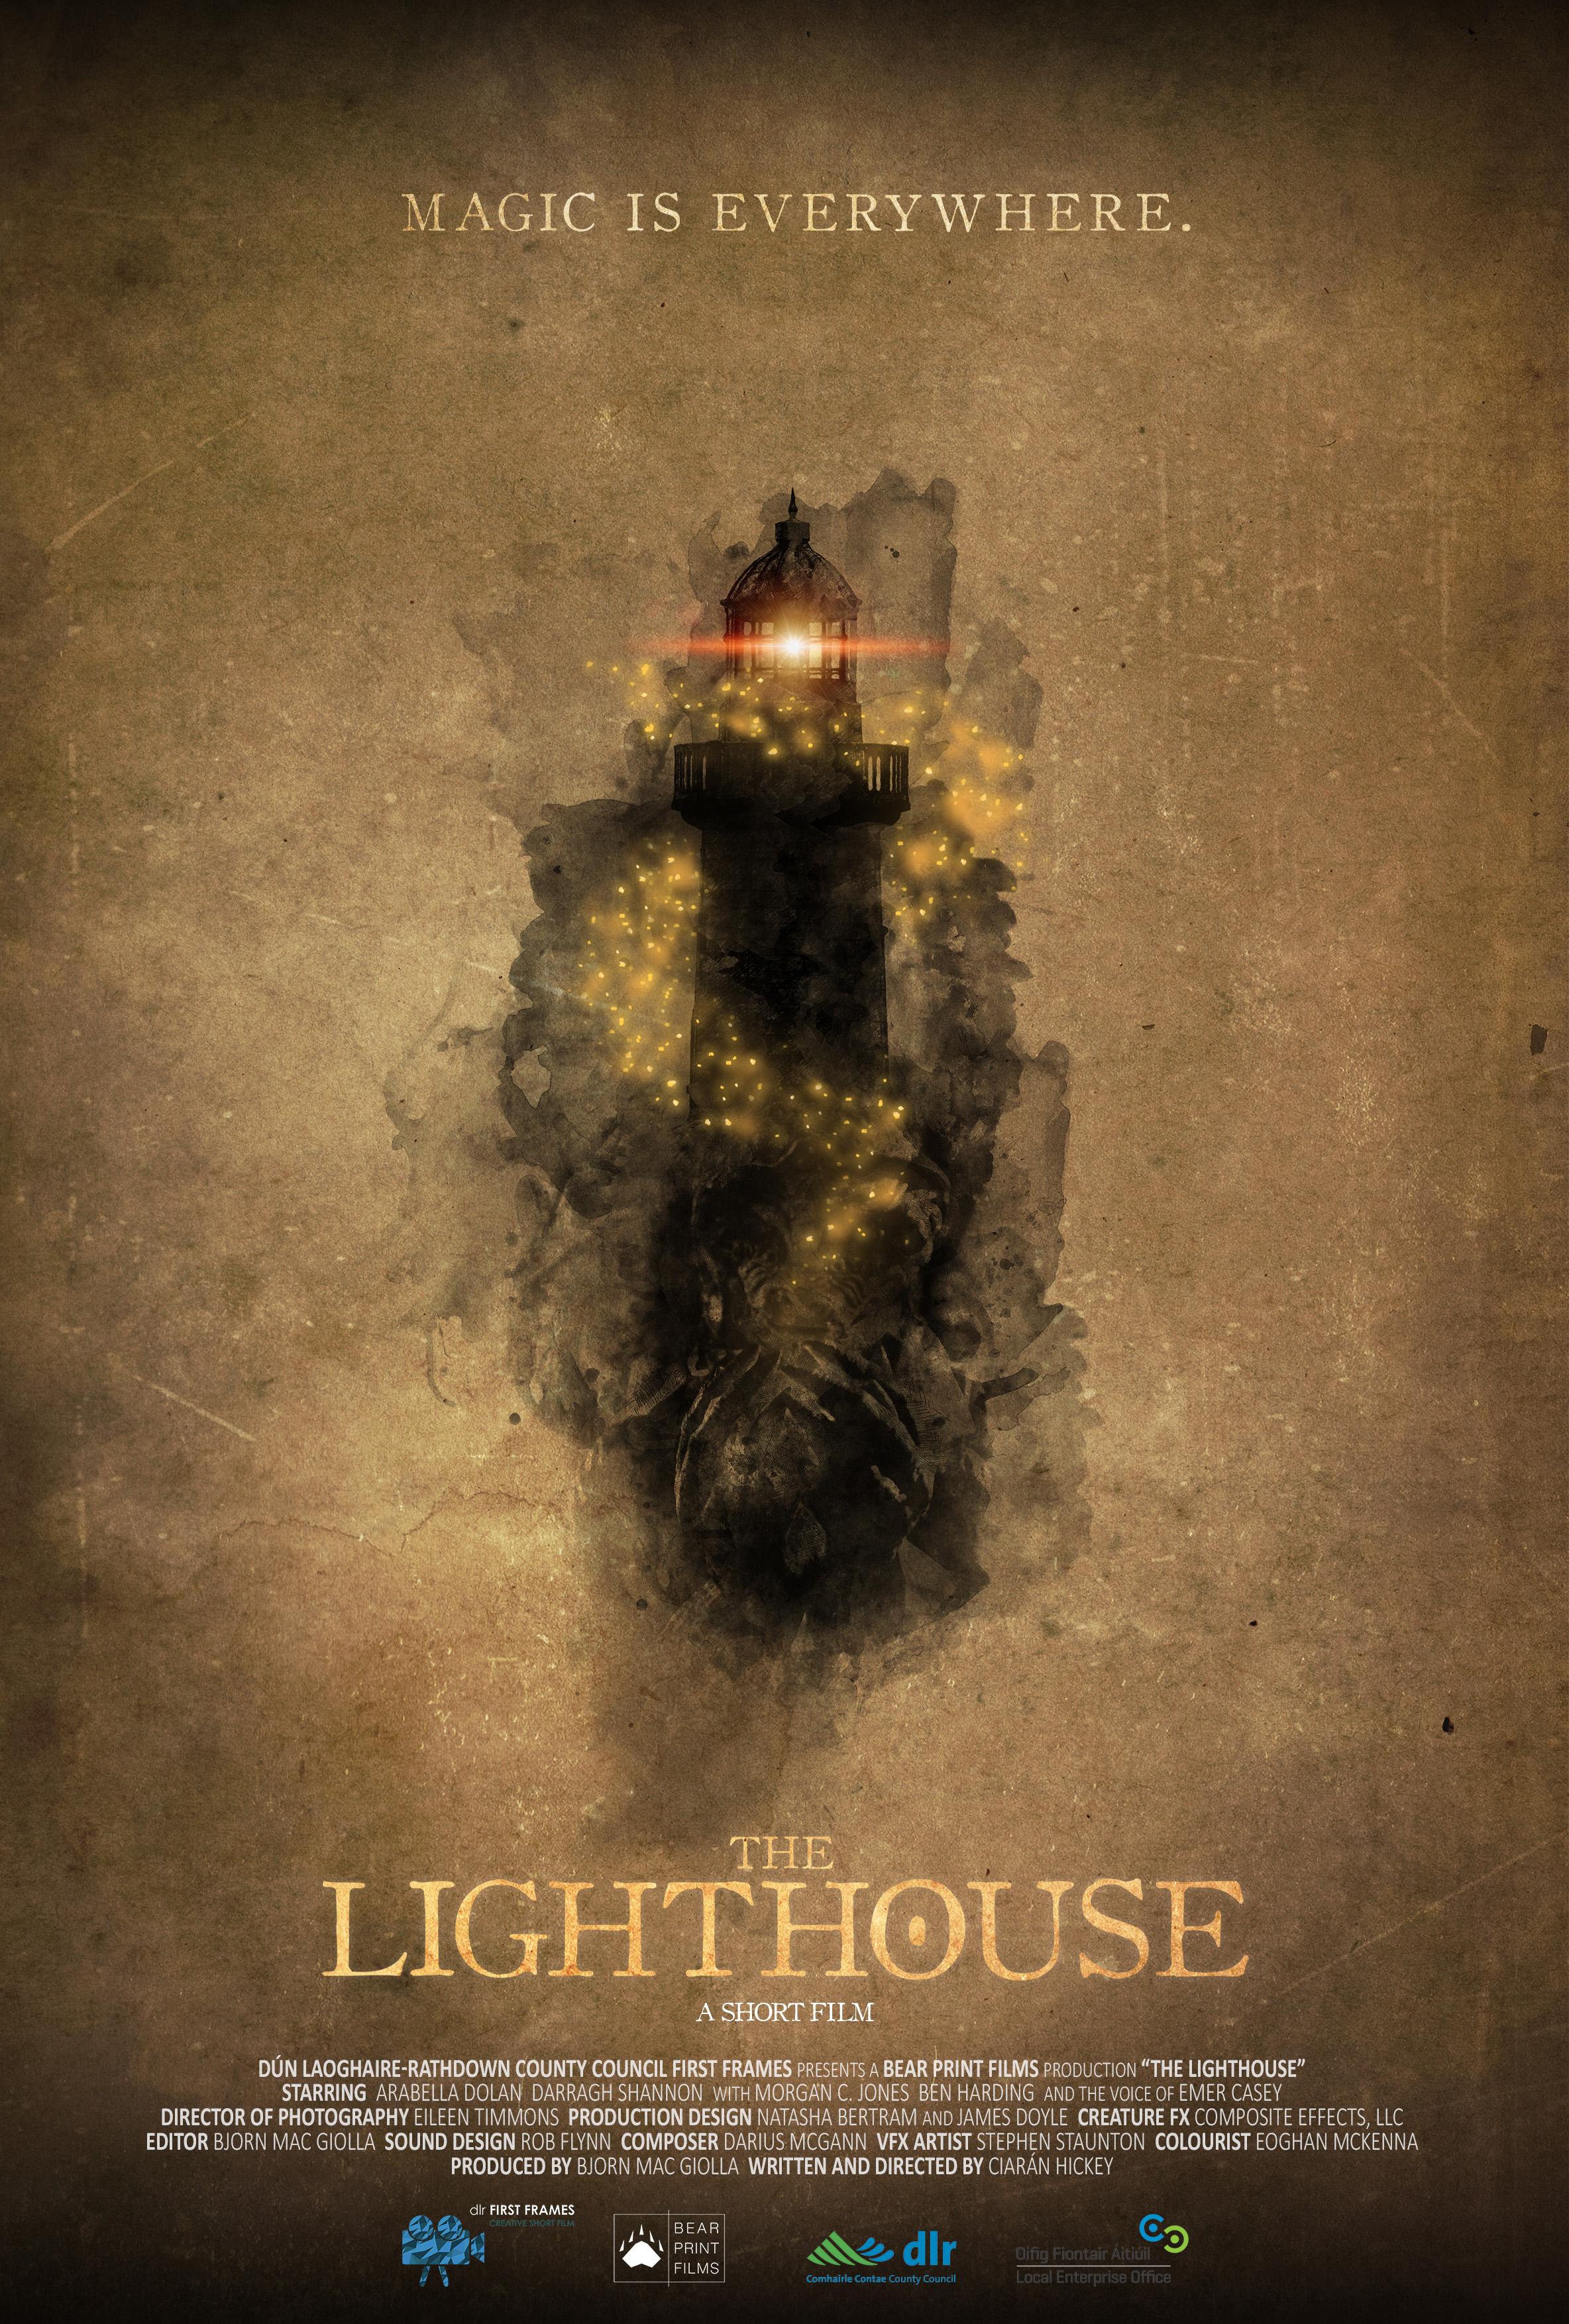 The Lighthouse Movie 2019. Released Between 2019 01 01